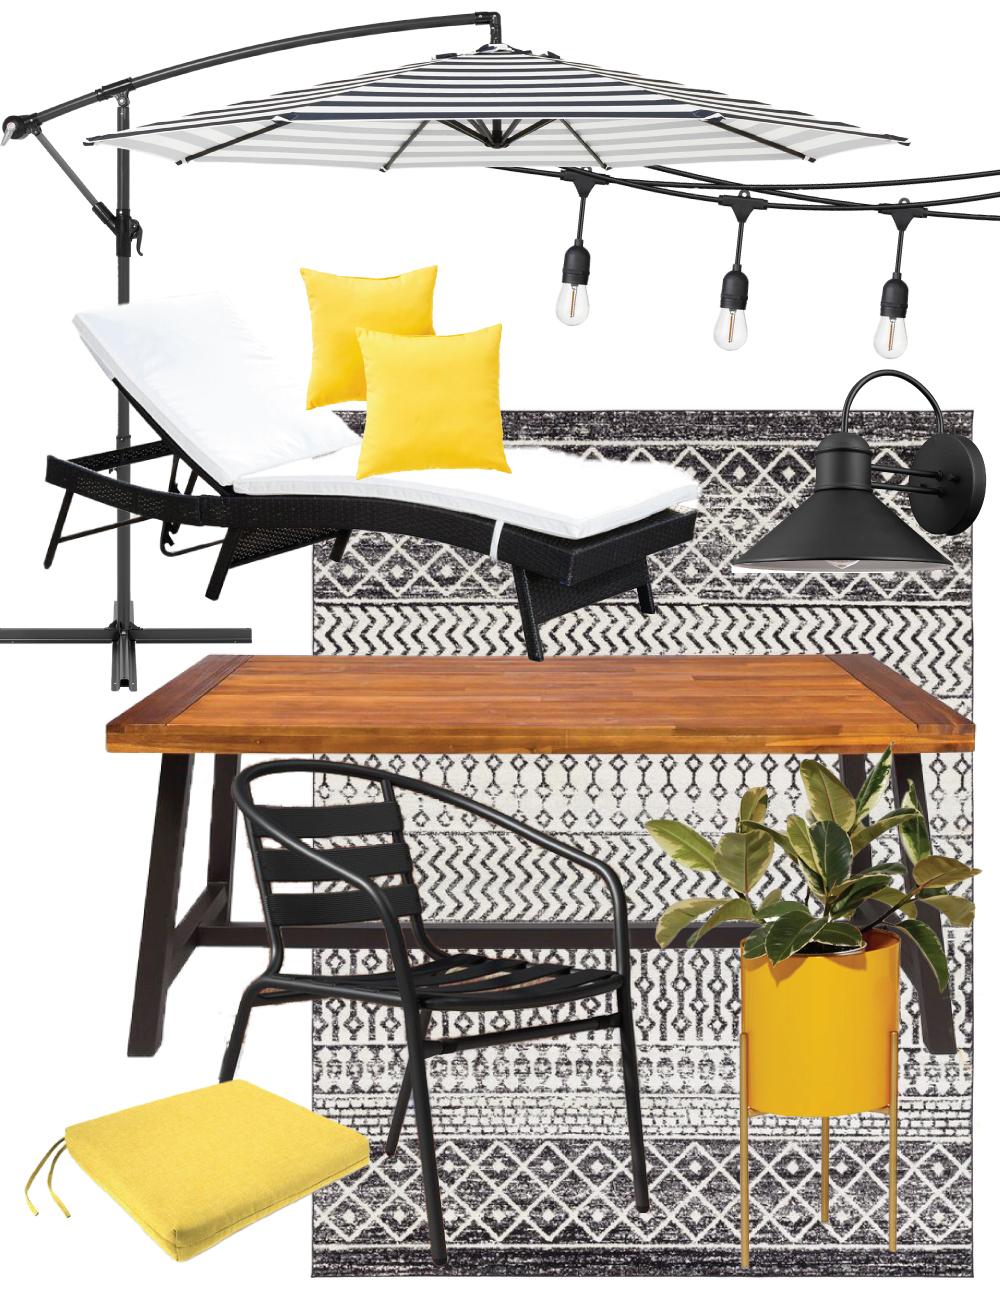 mood board of vintage-inspired outdoor decor inspiration for fall